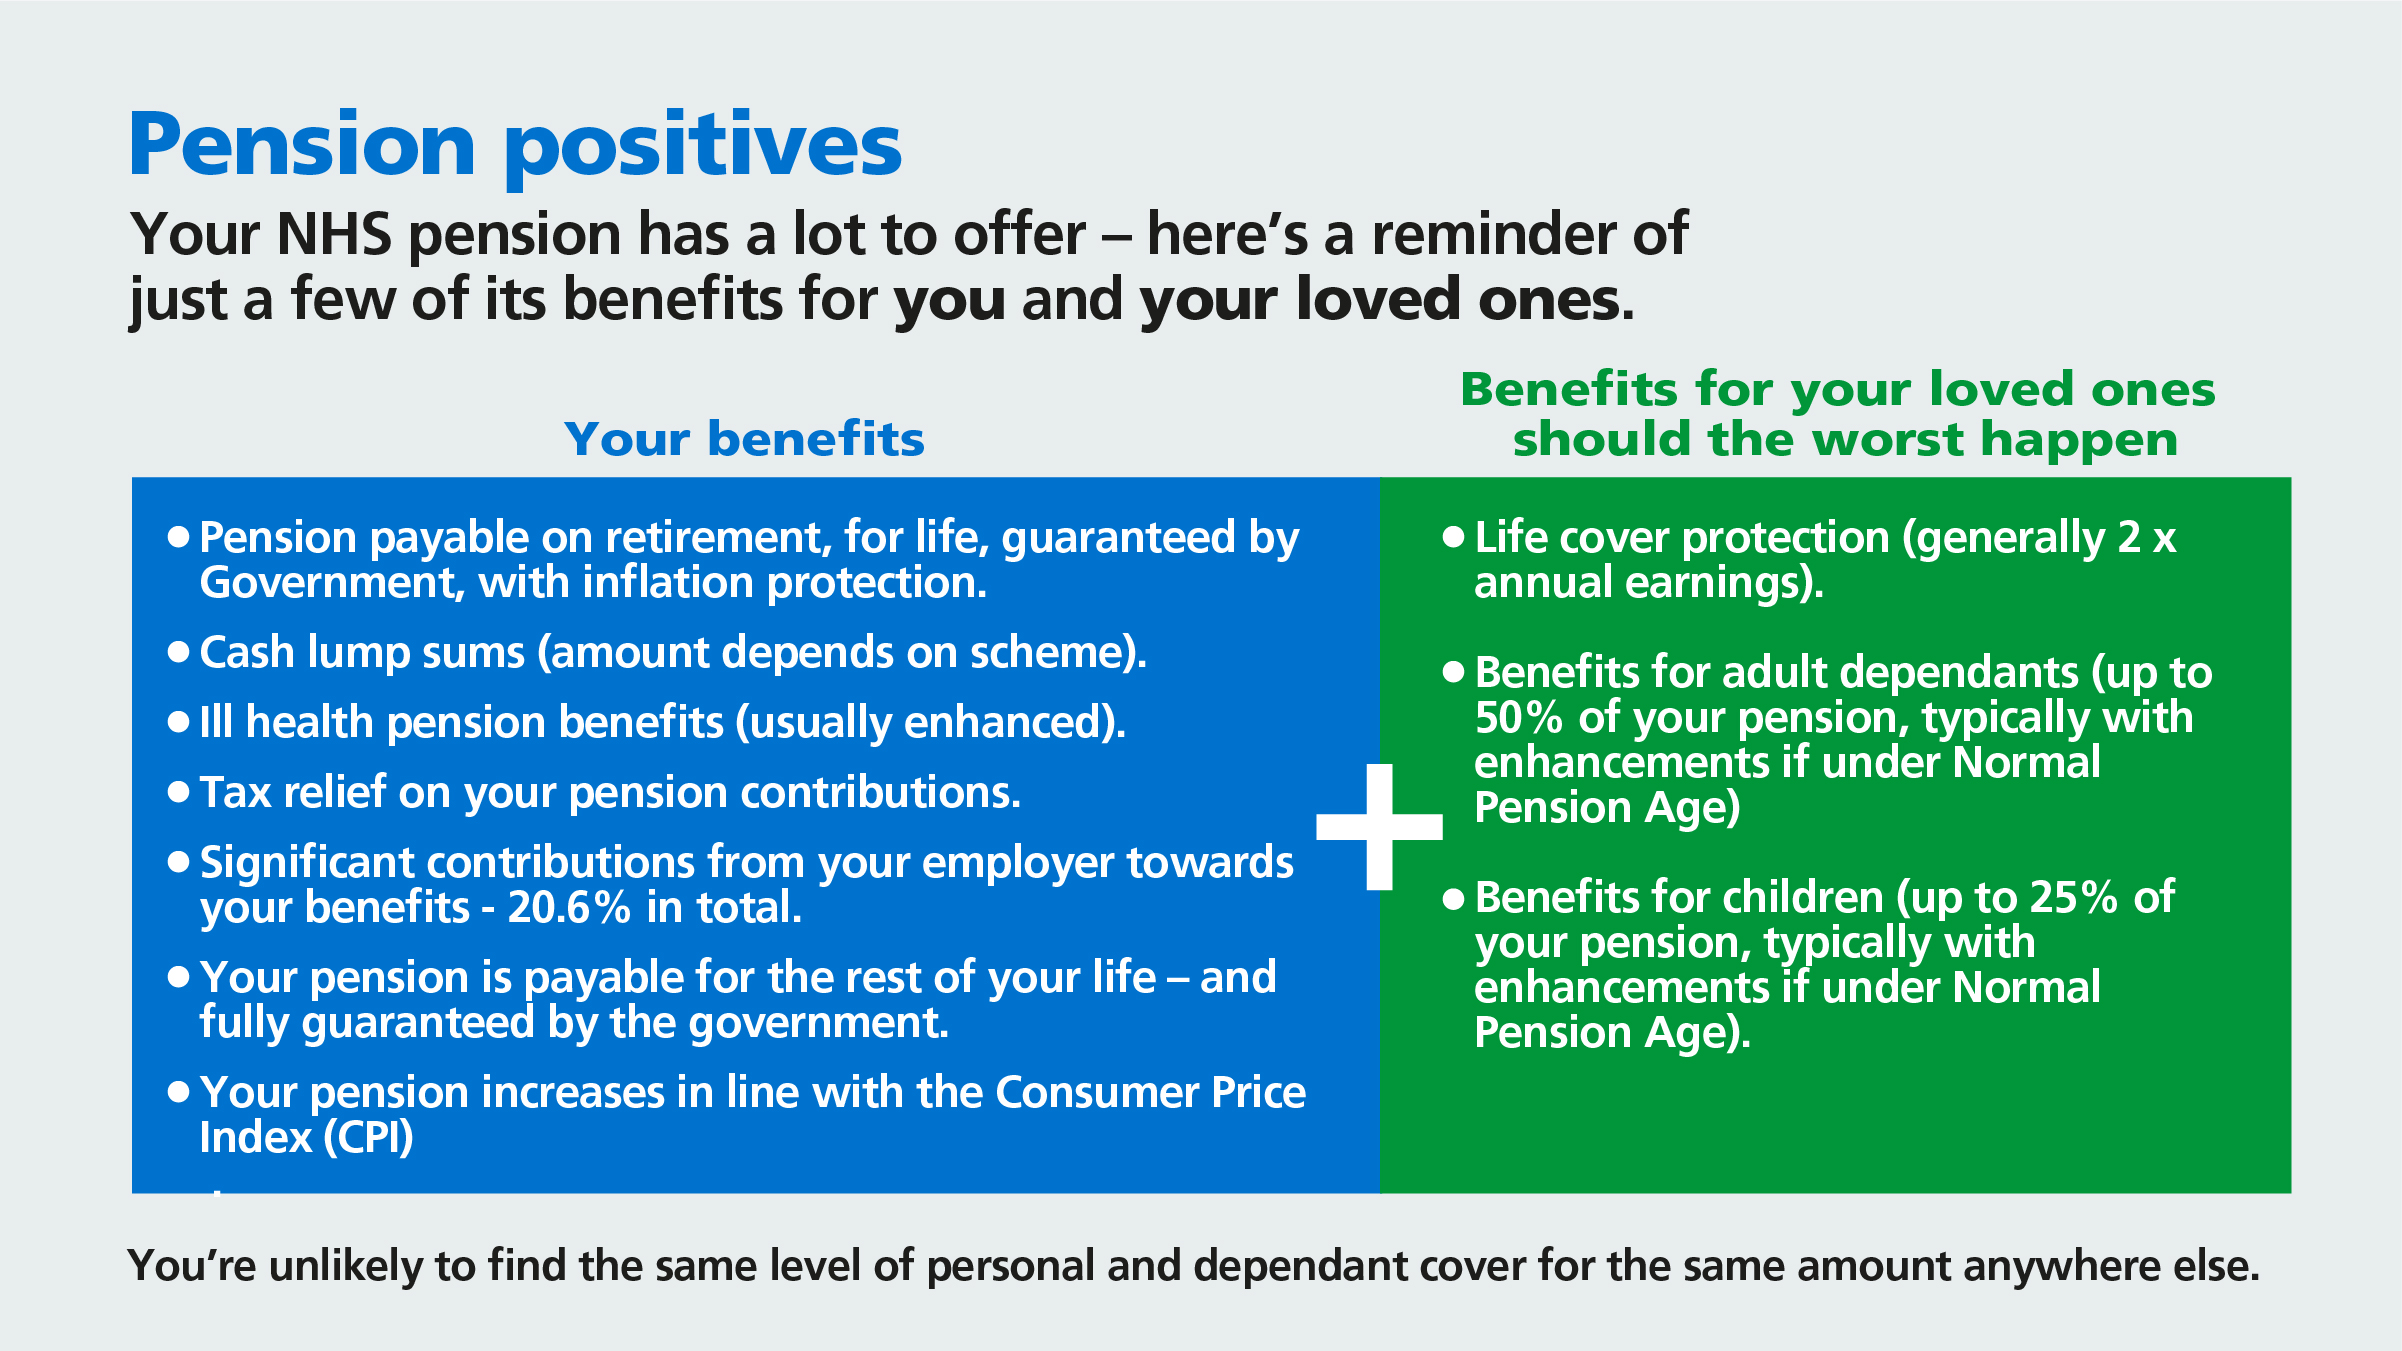 Your NHS pension has a lot to offer – here’s a reminder of just a few of its benefits. Your pension is payable for the rest of your life – and fully guaranteed by the government. Your pension increases in line with the Consumer Price Index (CPI) It’s extremely generous – the employer contribution is 20.6% of your pensionable pay – you’re unlikely to find the same level of personal and dependent cover for the same amount anywhere else. Your pension offers financial support for your family too – life assurance lump sum of twice your salary and annual pensions for your partner and children should the worst happen.